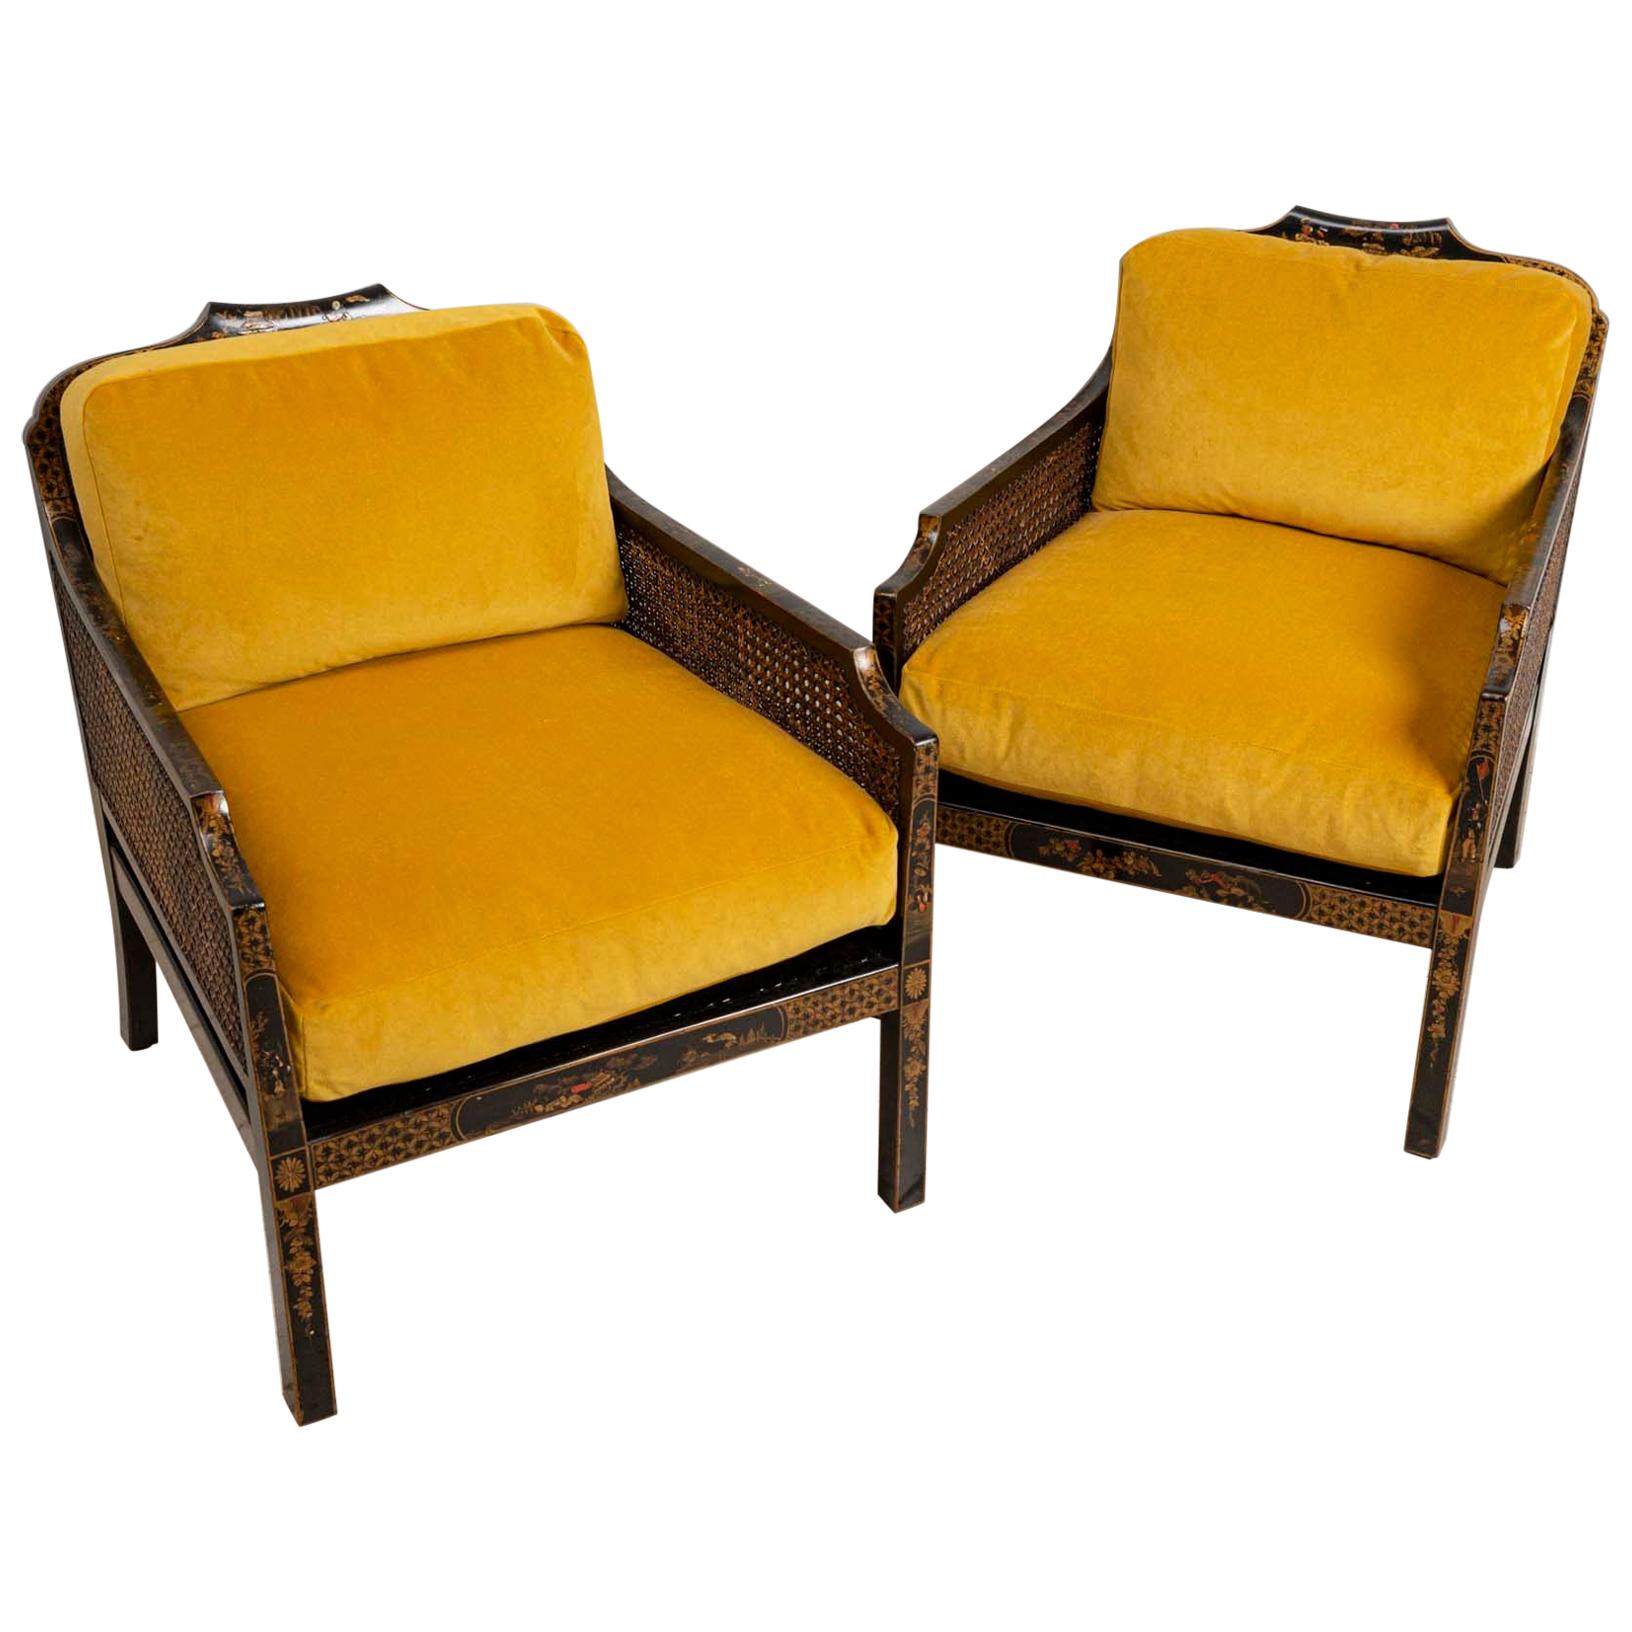 Pair of 1920s English Japanned Armchairs with Chinoiserie Decoration